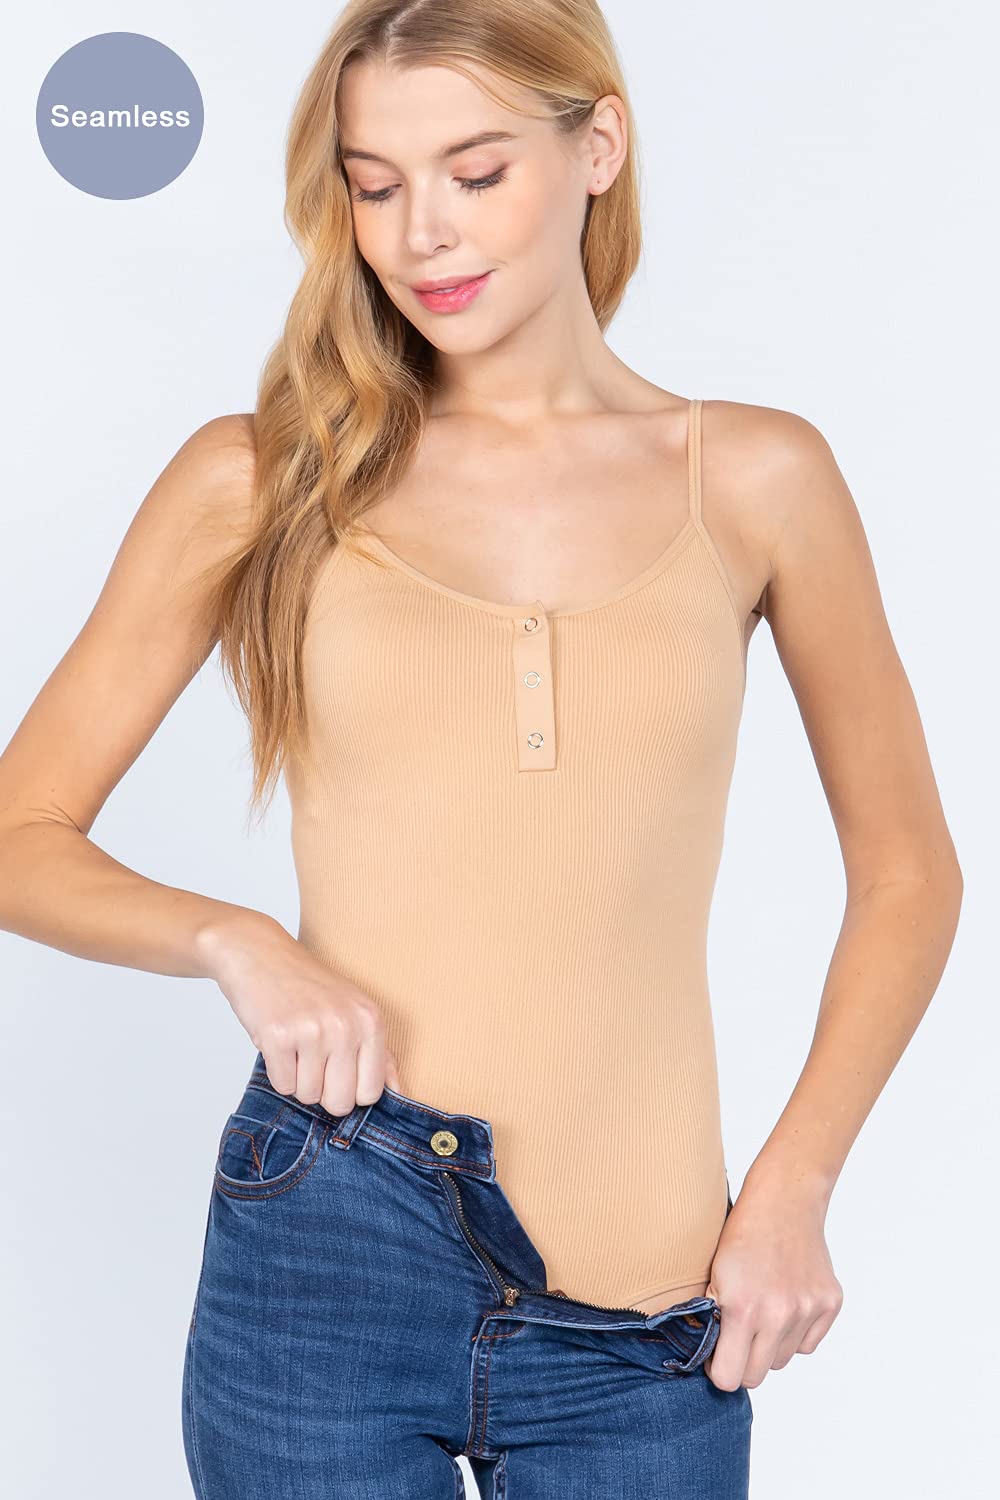 Women's Women's Ribbed Seamless Buttoned Spaghetti Strapped Cami Bodysuit